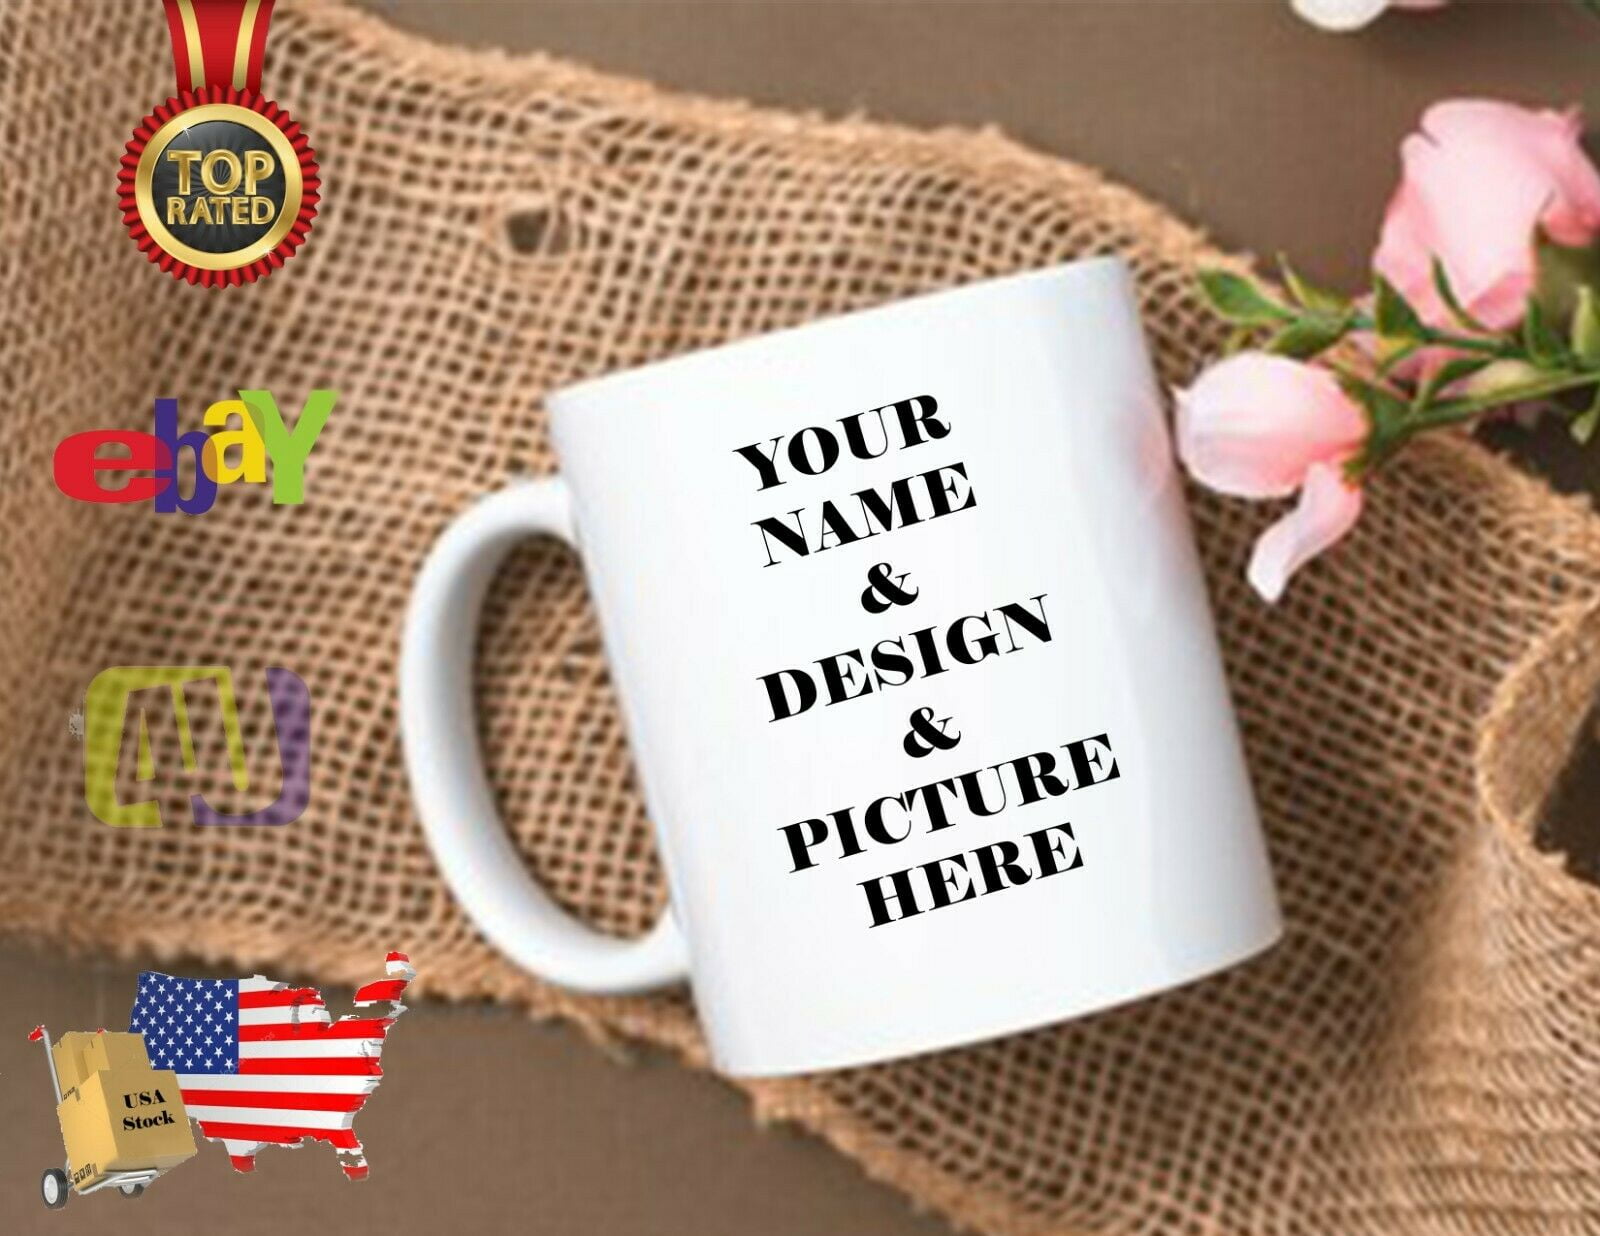 New Design Kids Character Licence Mug 350ML Drinking Plastic Cup Microwave  Safe